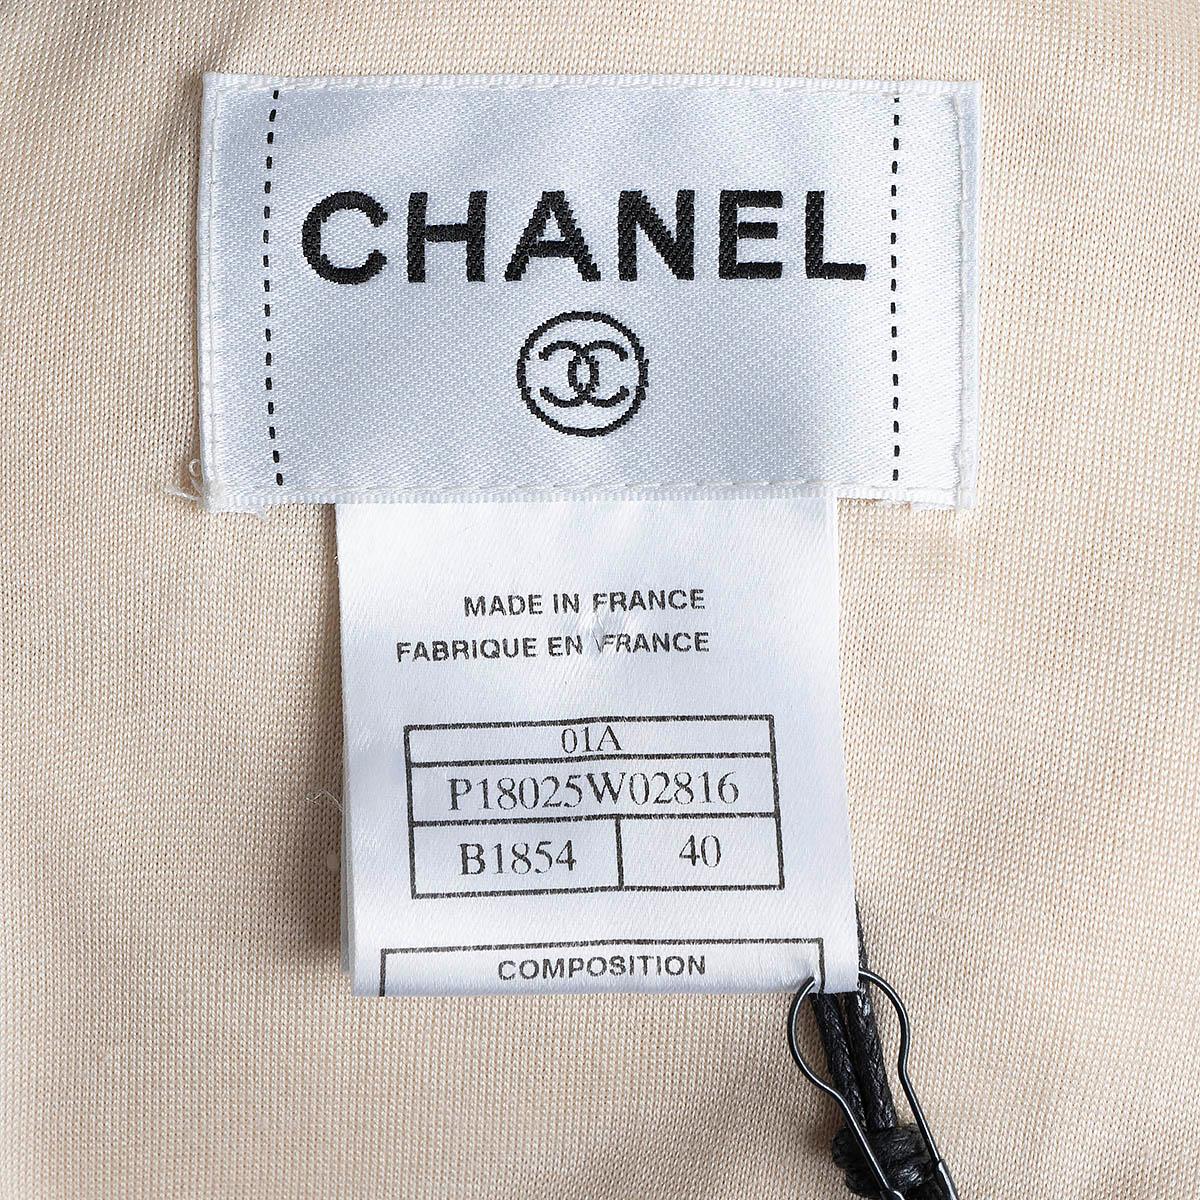 CHANEL cream & black silk & wool 2001 01A PLEATED COLORBLOCK Dress 40 M For Sale 5